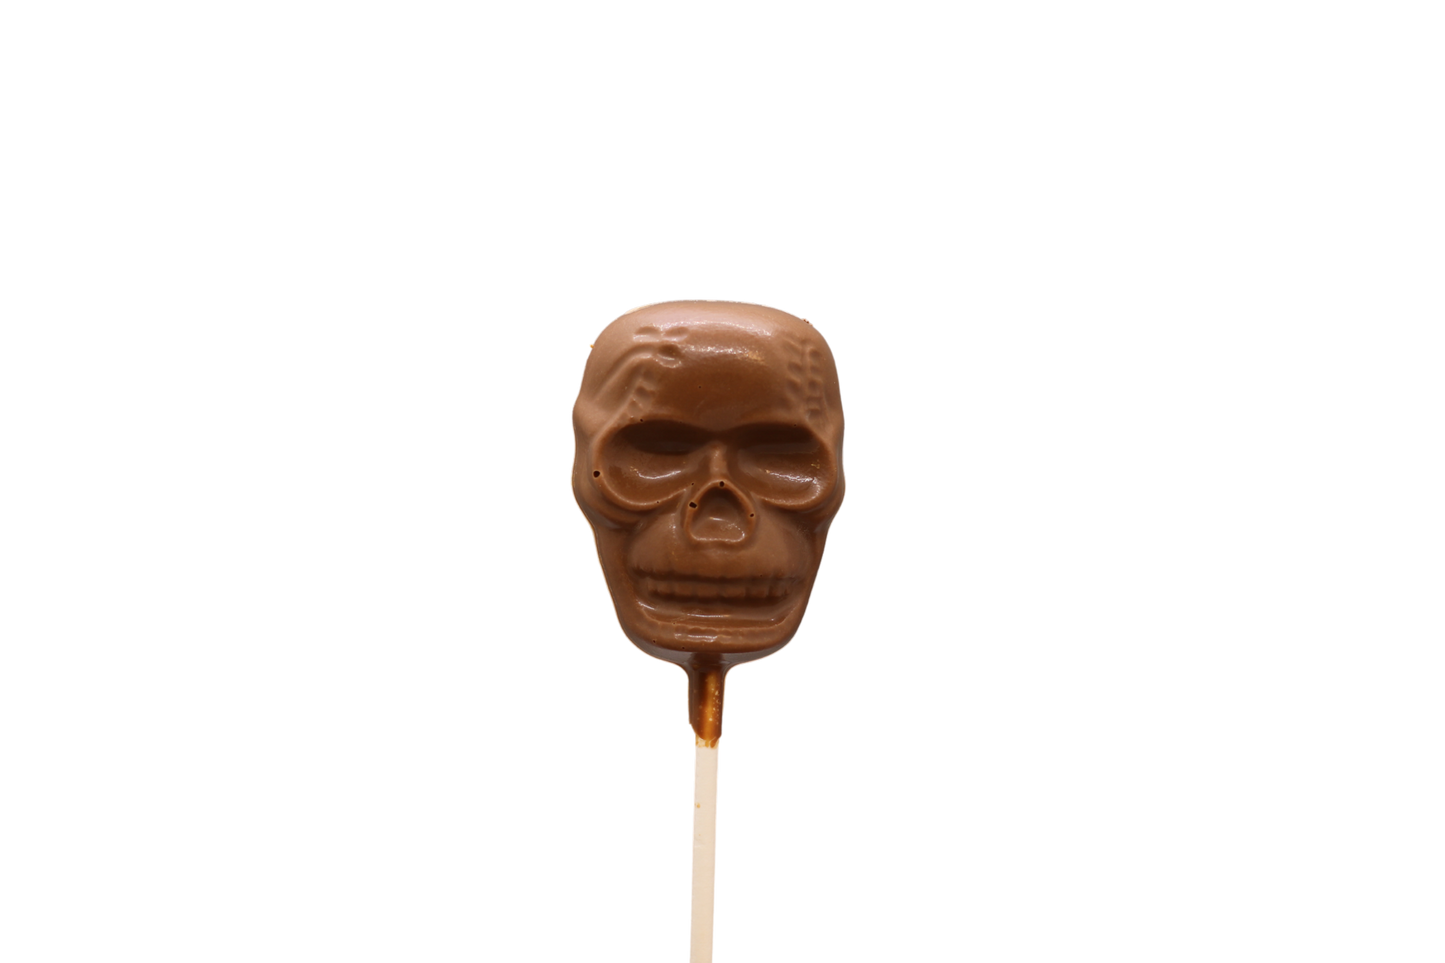 Milk Chocolate Skull Pop - Handcrafted from Premium Quality Ingredients - Perfect Gift or Party Favor - Mueller's Chocolate Co.